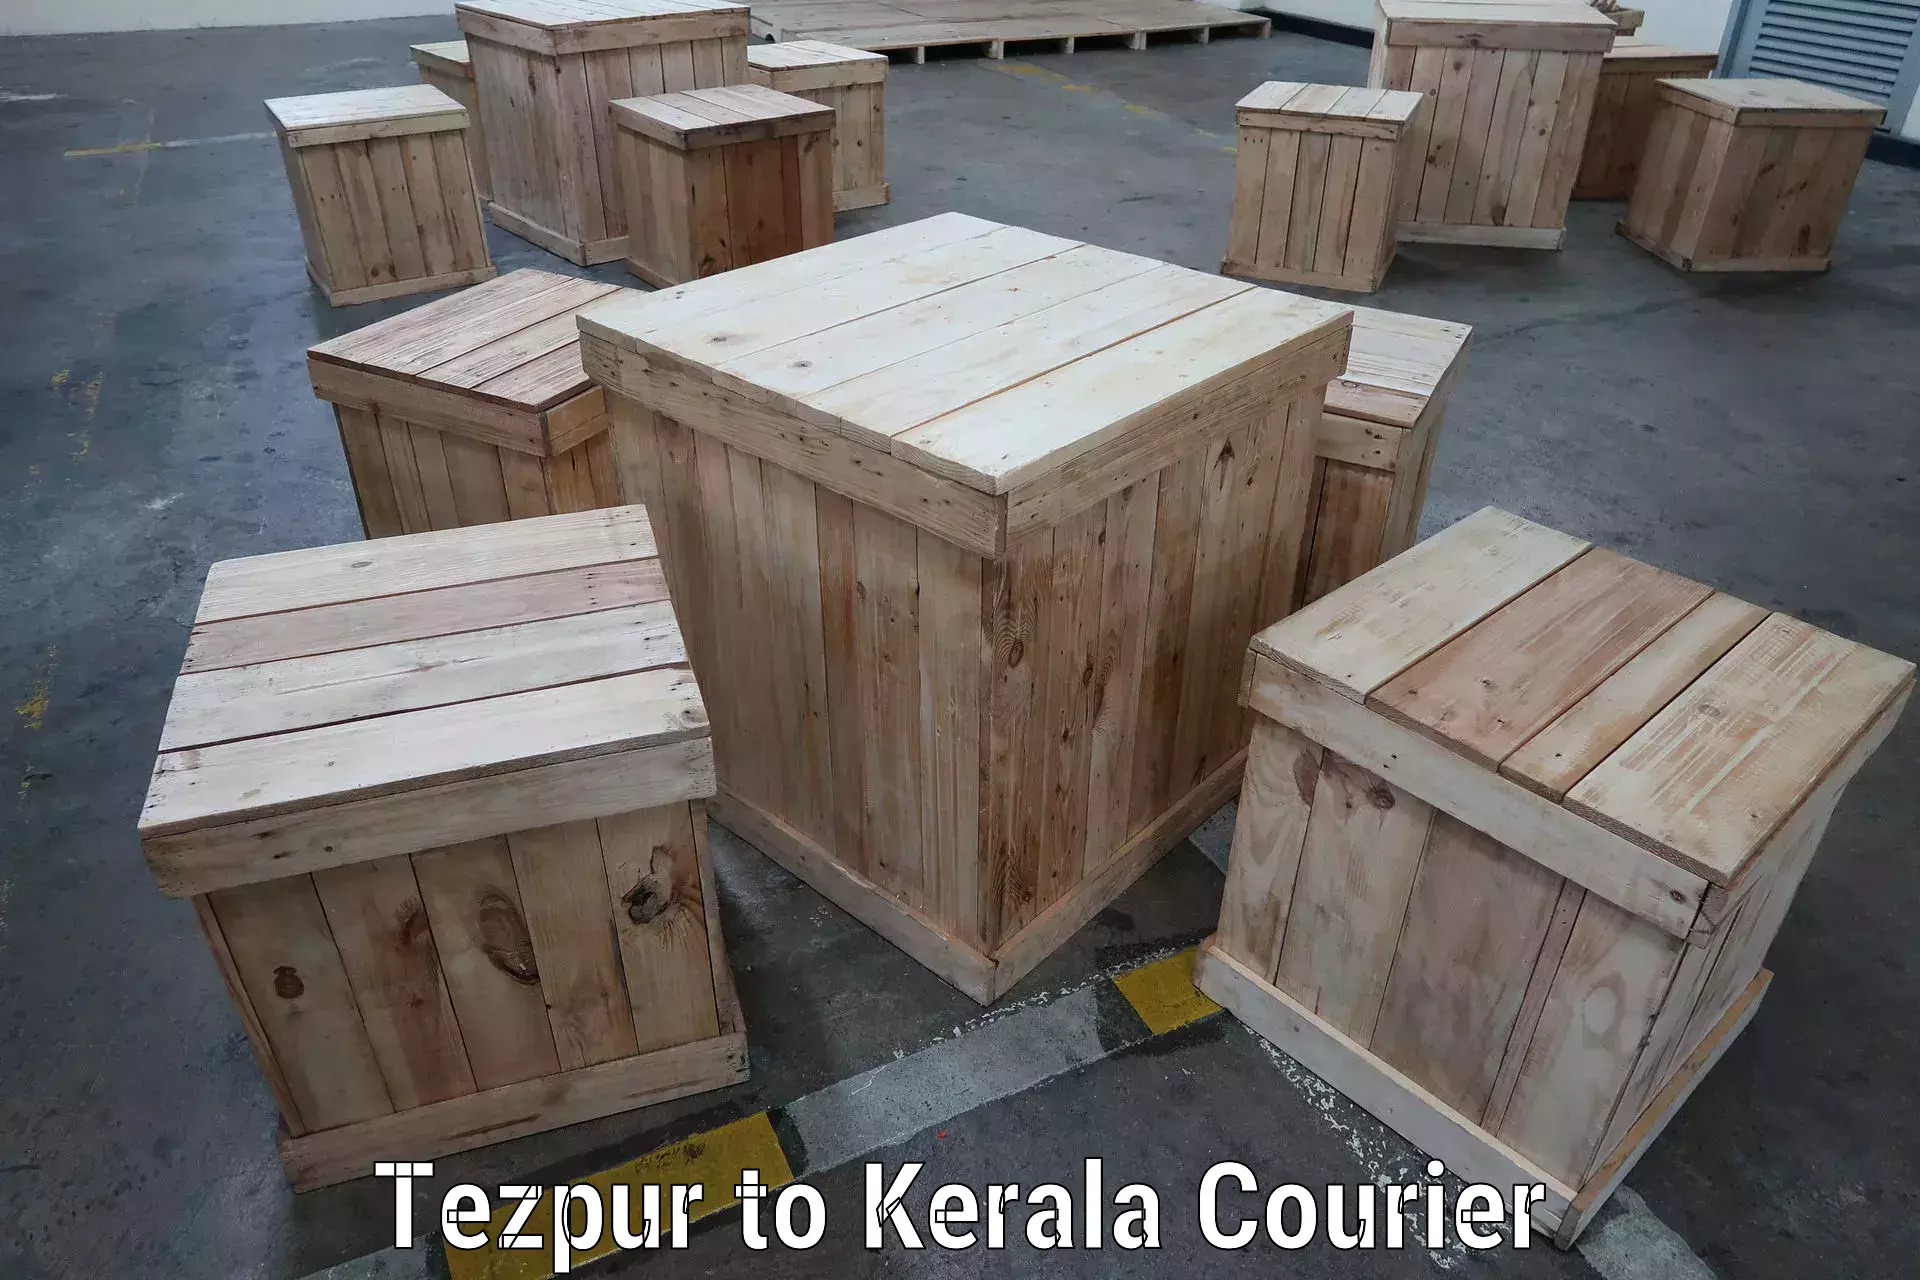 International courier networks Tezpur to Pala